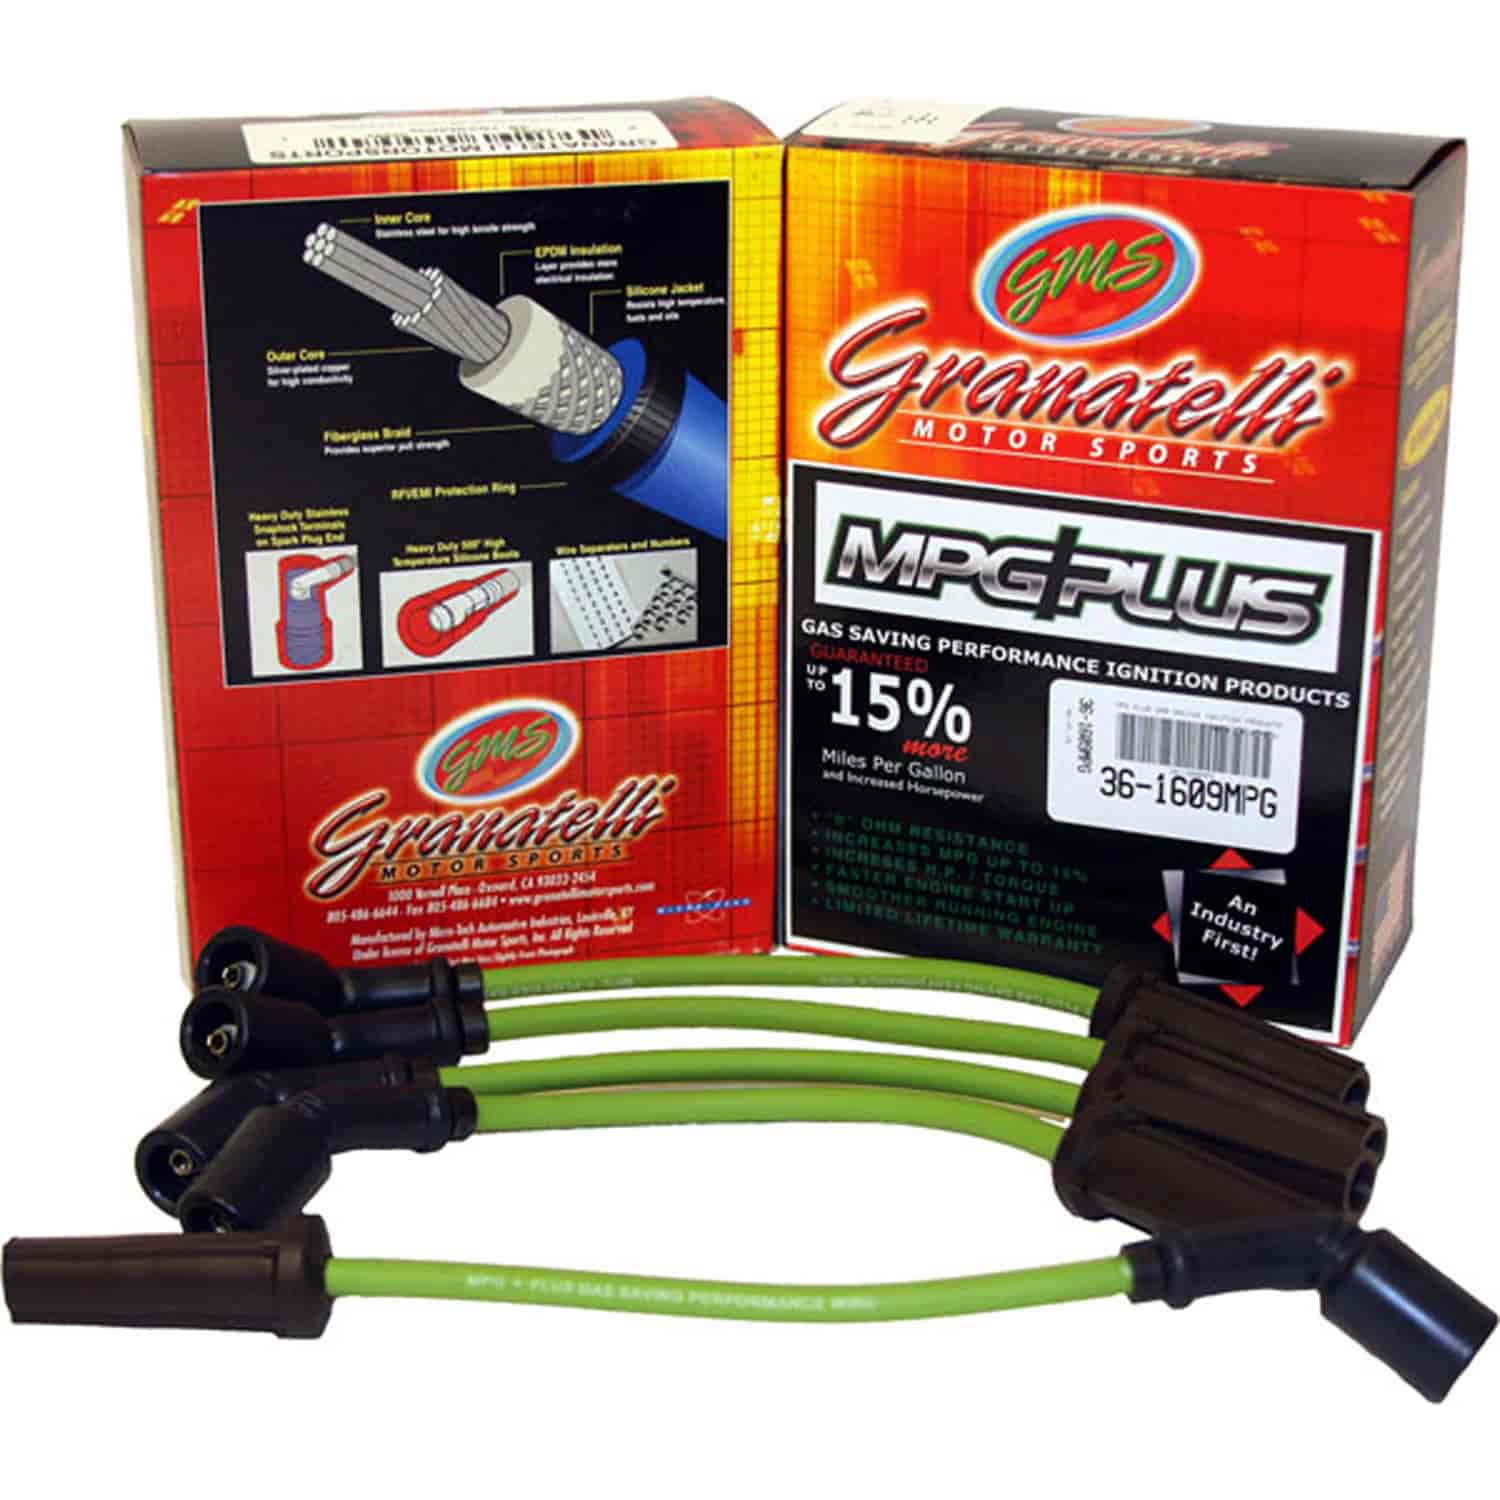 MPG Wires TOYOTA 4 RUNNER 6CYL 3.4L 96-01